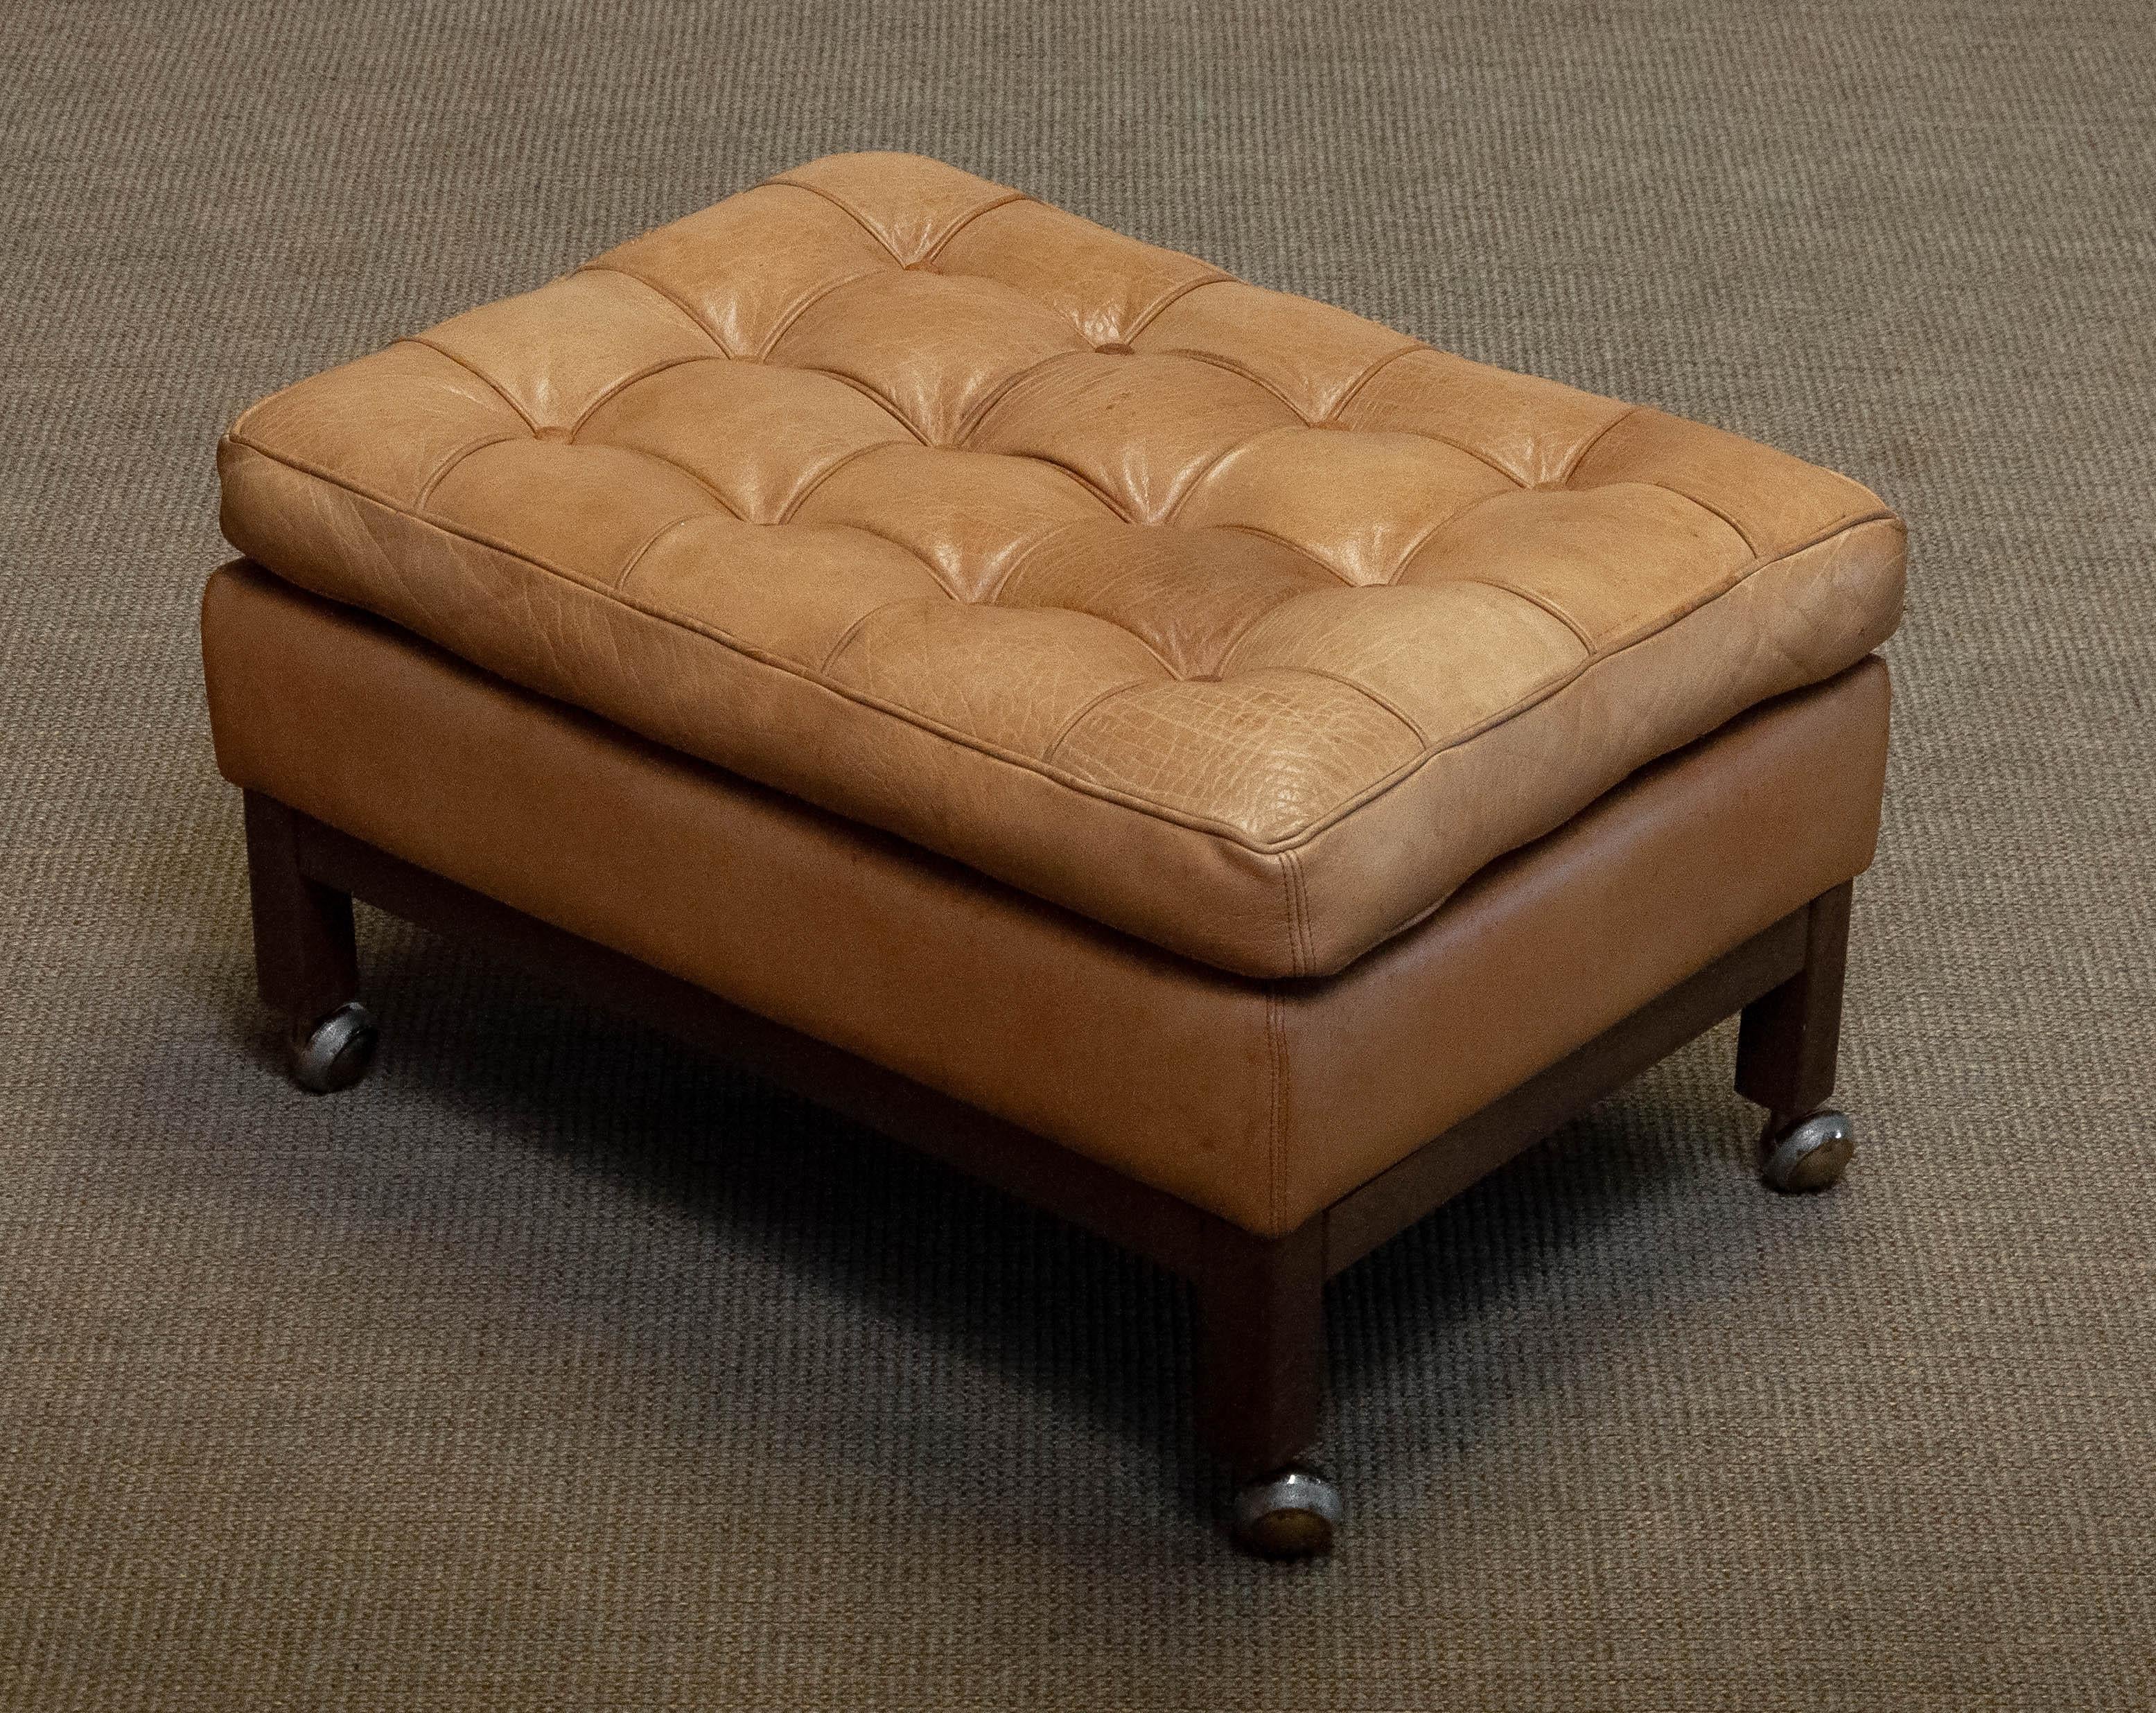 Chesterfield 1970s Camel / Brown Colored Leather Ottoman Model 'Merkur' by Arne Norell For Sale